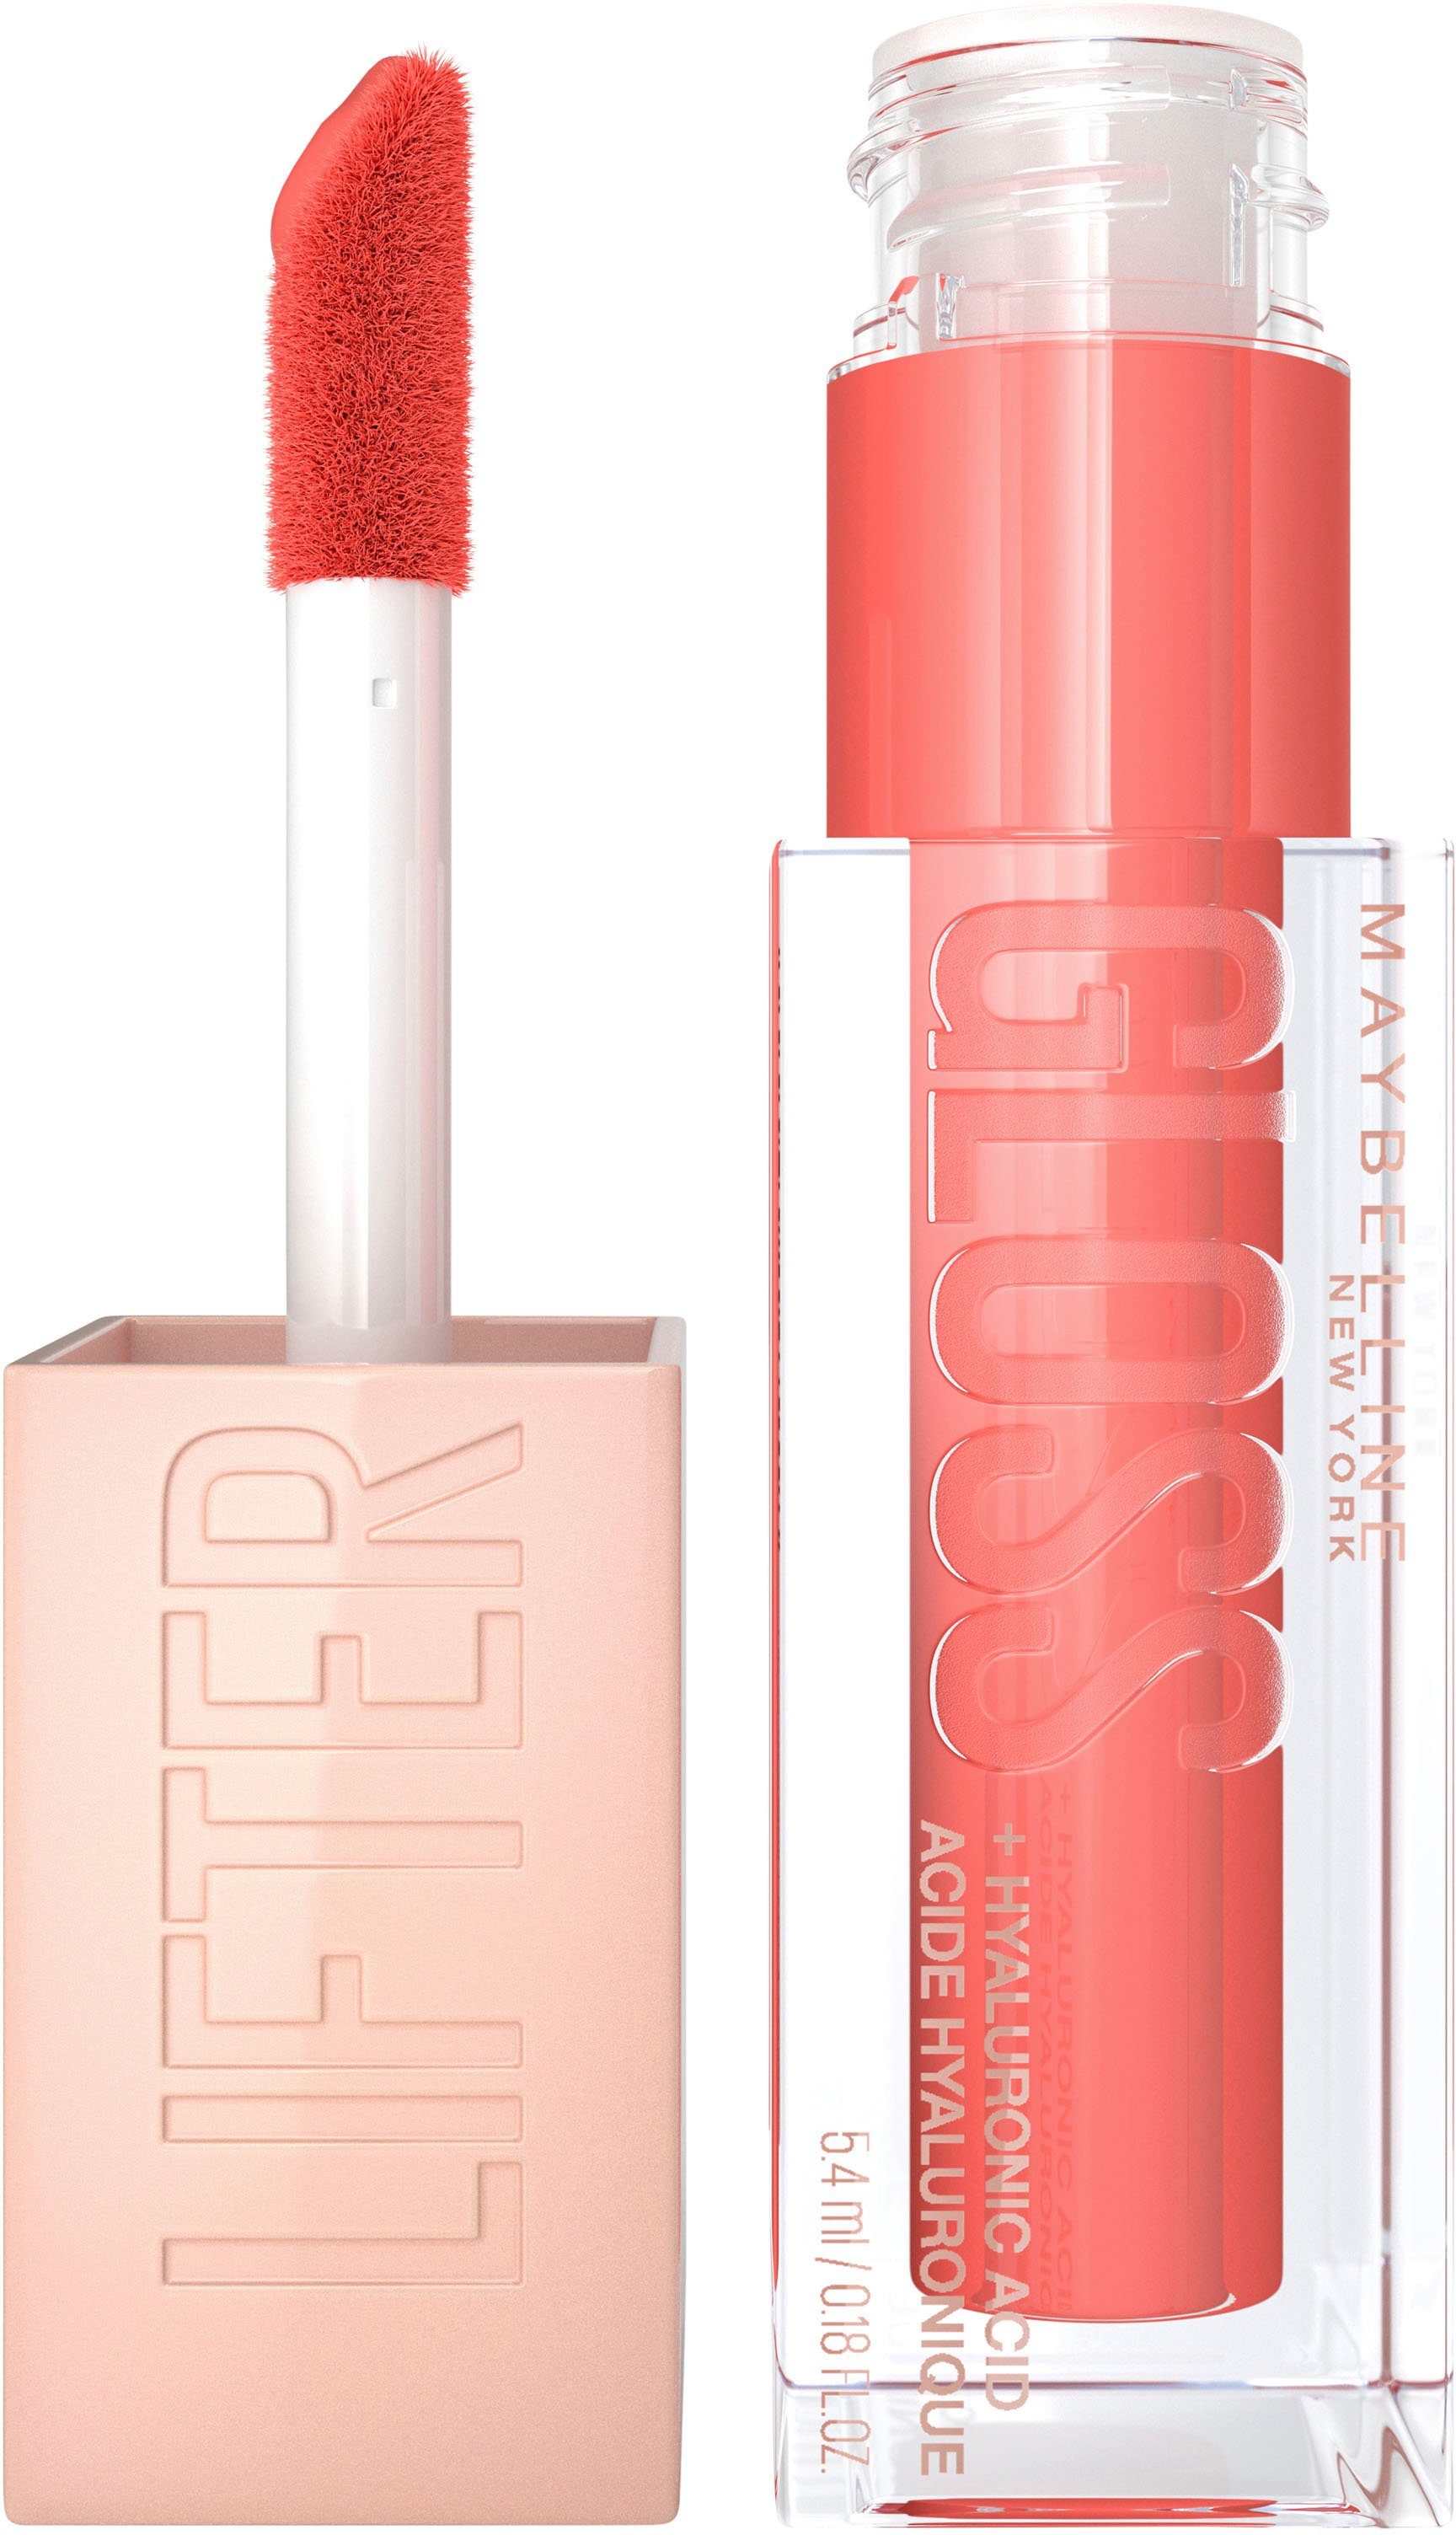 MAYBELLINE NEW YORK Lipgloss Lifter New York Gloss Maybelline